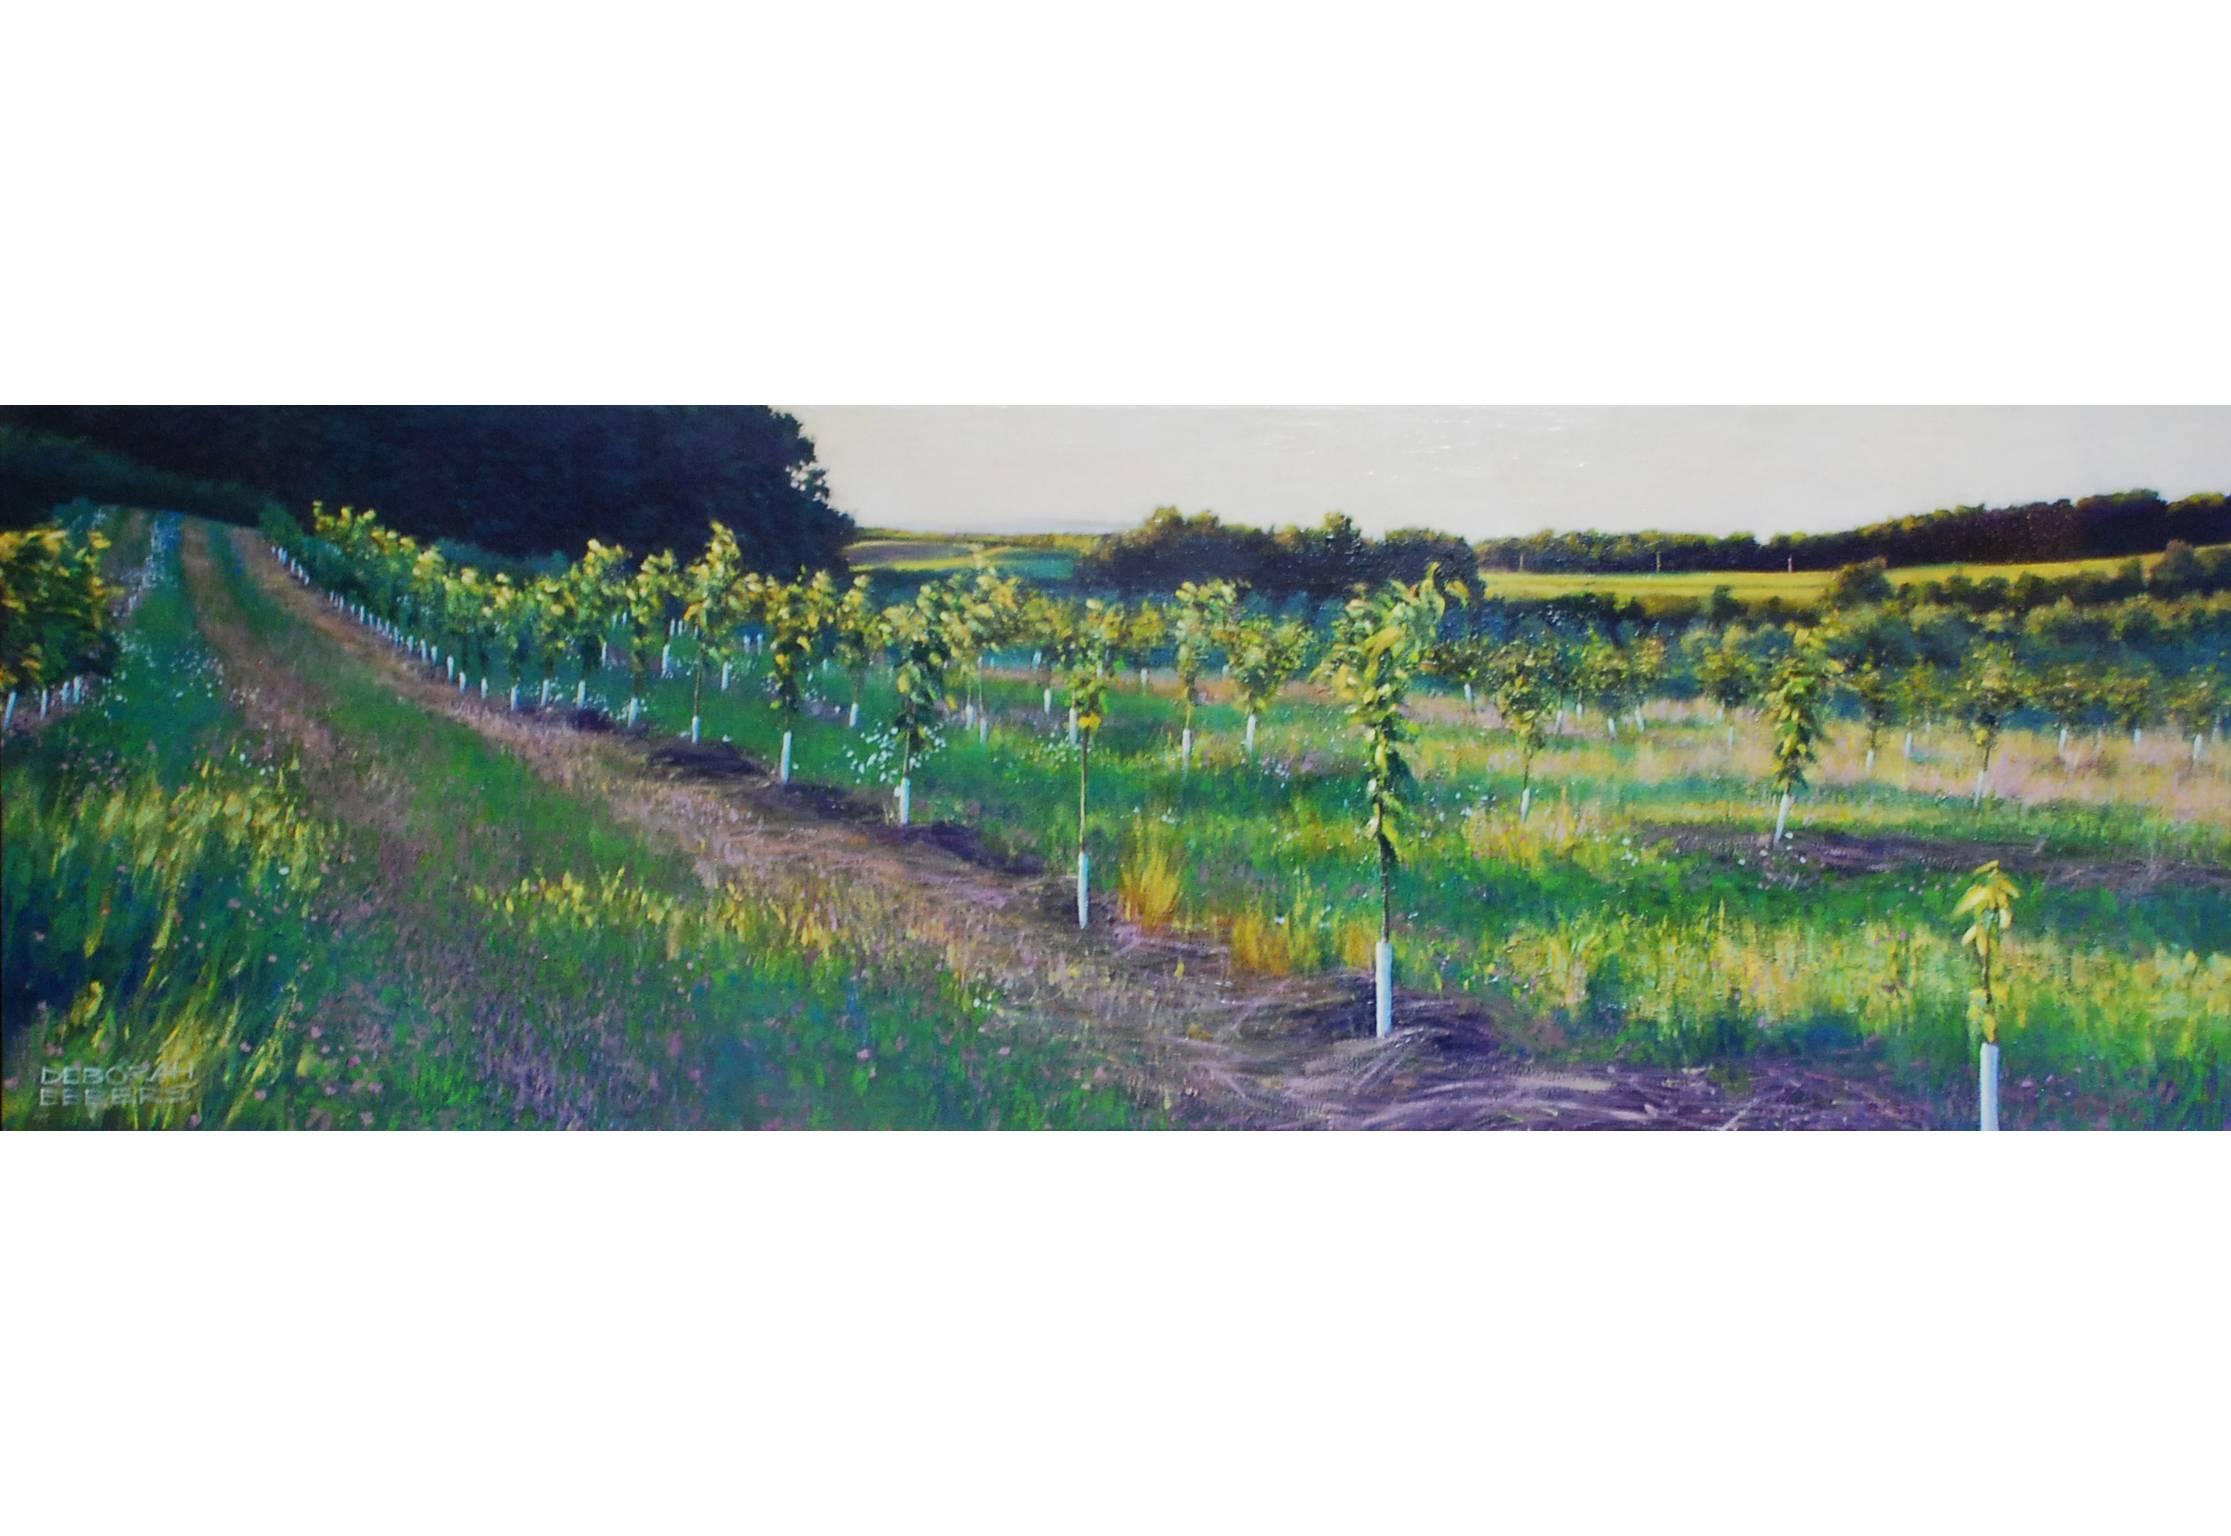 Deborah Ebbers Landscape Painting - Orchard Path - Original Oil Painting of Orchard and Hills Bathed in Spring Light